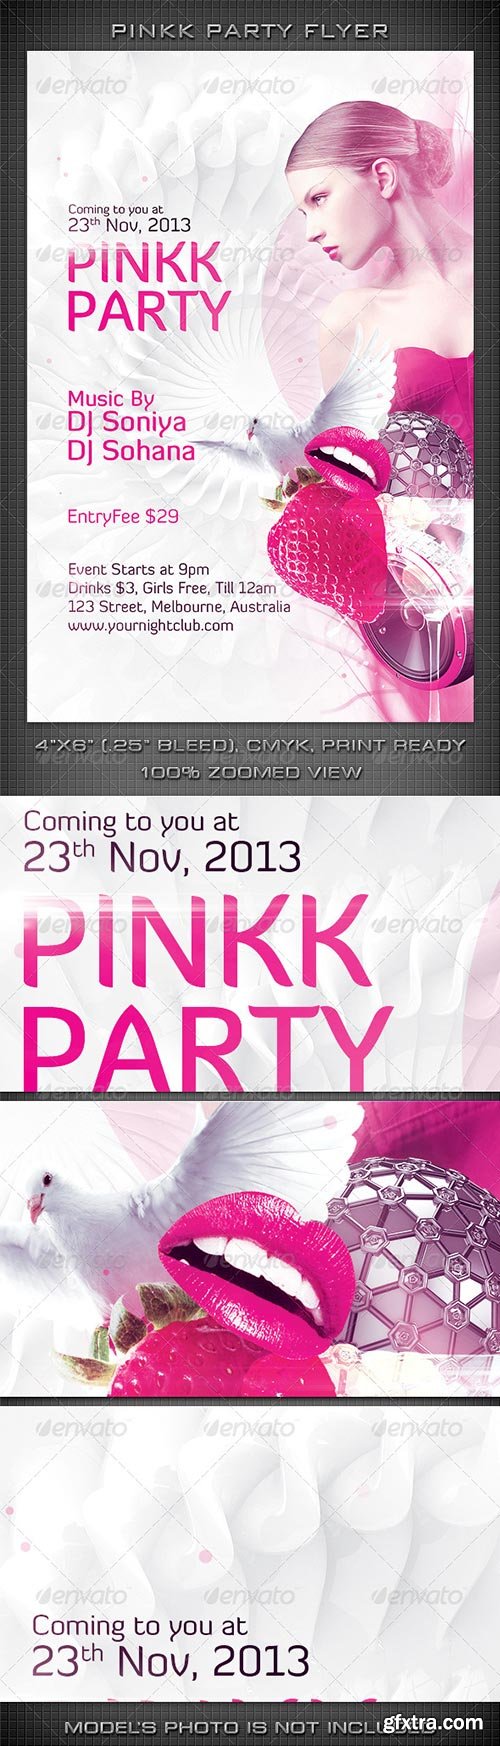 Graphicriver - Pinkk Party Flyer 6078165